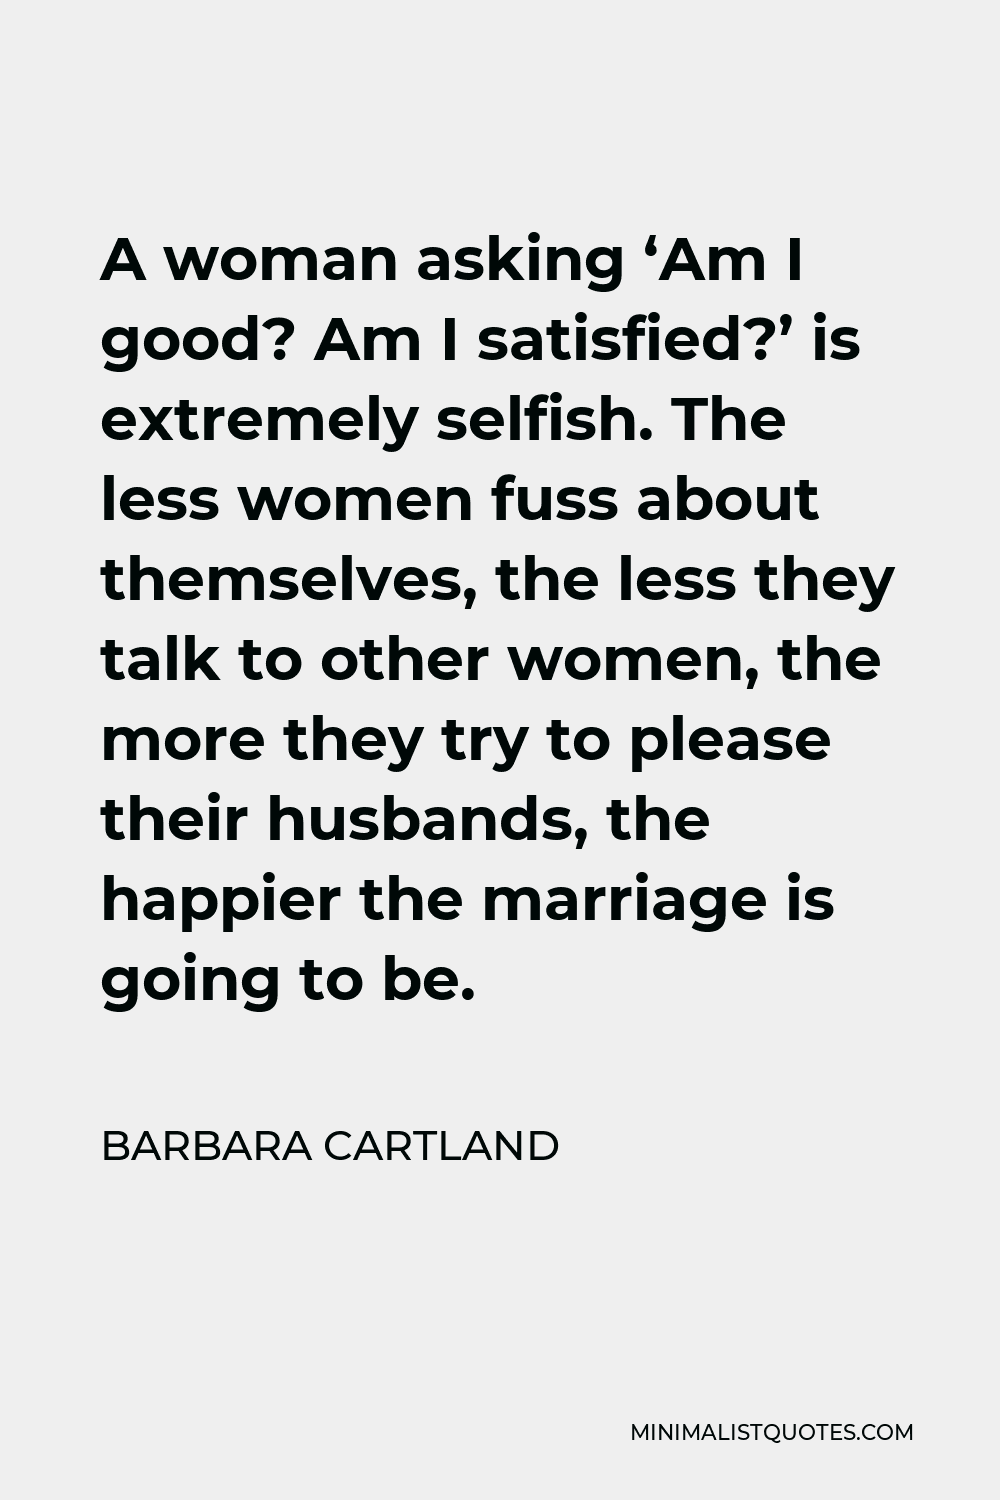 Barbara Cartland Quote - A woman asking ‘Am I good? Am I satisfied?’ is extremely selfish. The less women fuss about themselves, the less they talk to other women, the more they try to please their husbands, the happier the marriage is going to be.